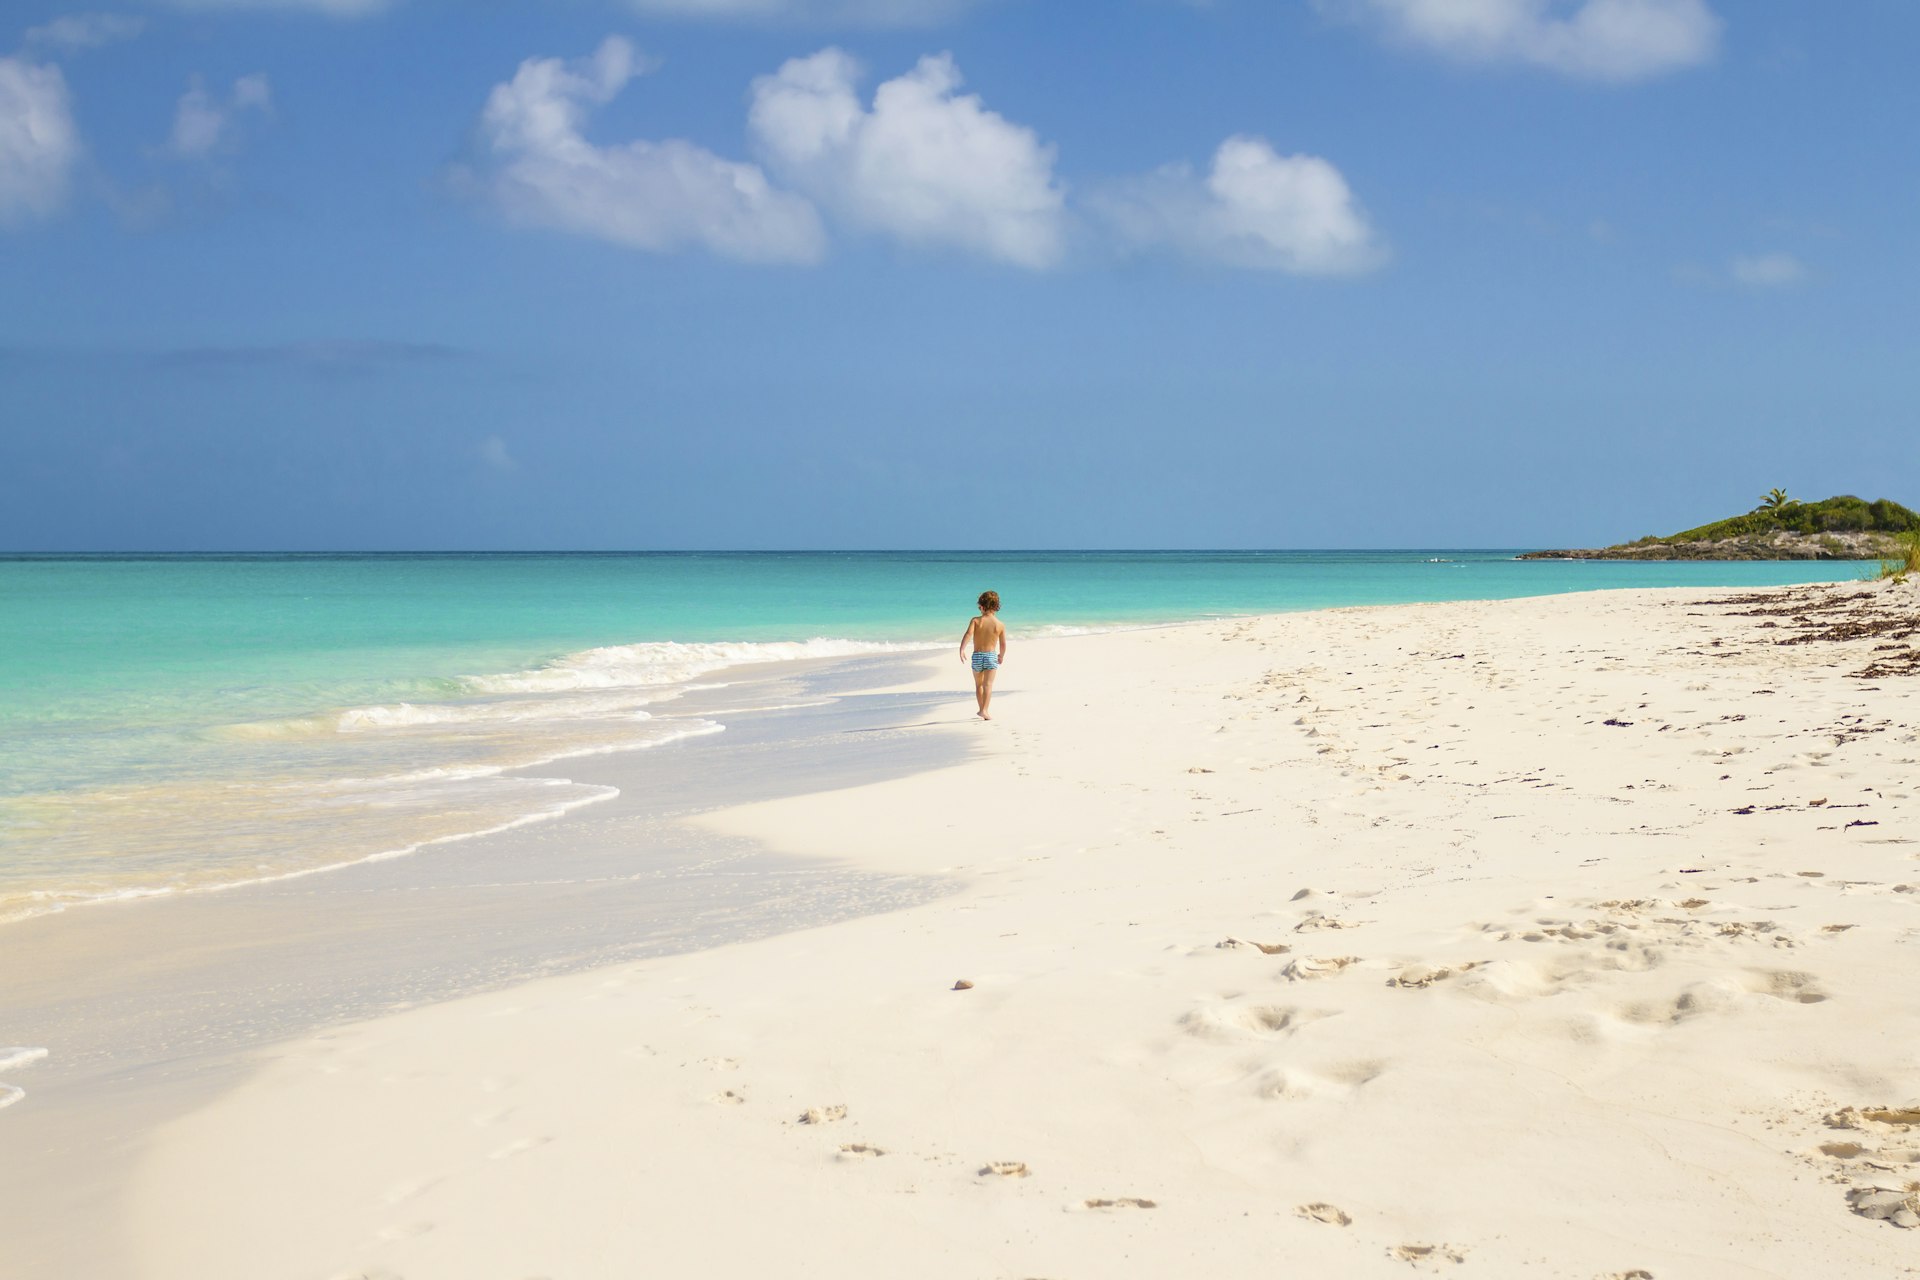 A small child running along the Tropic of Cancer Beach in the Bahamas